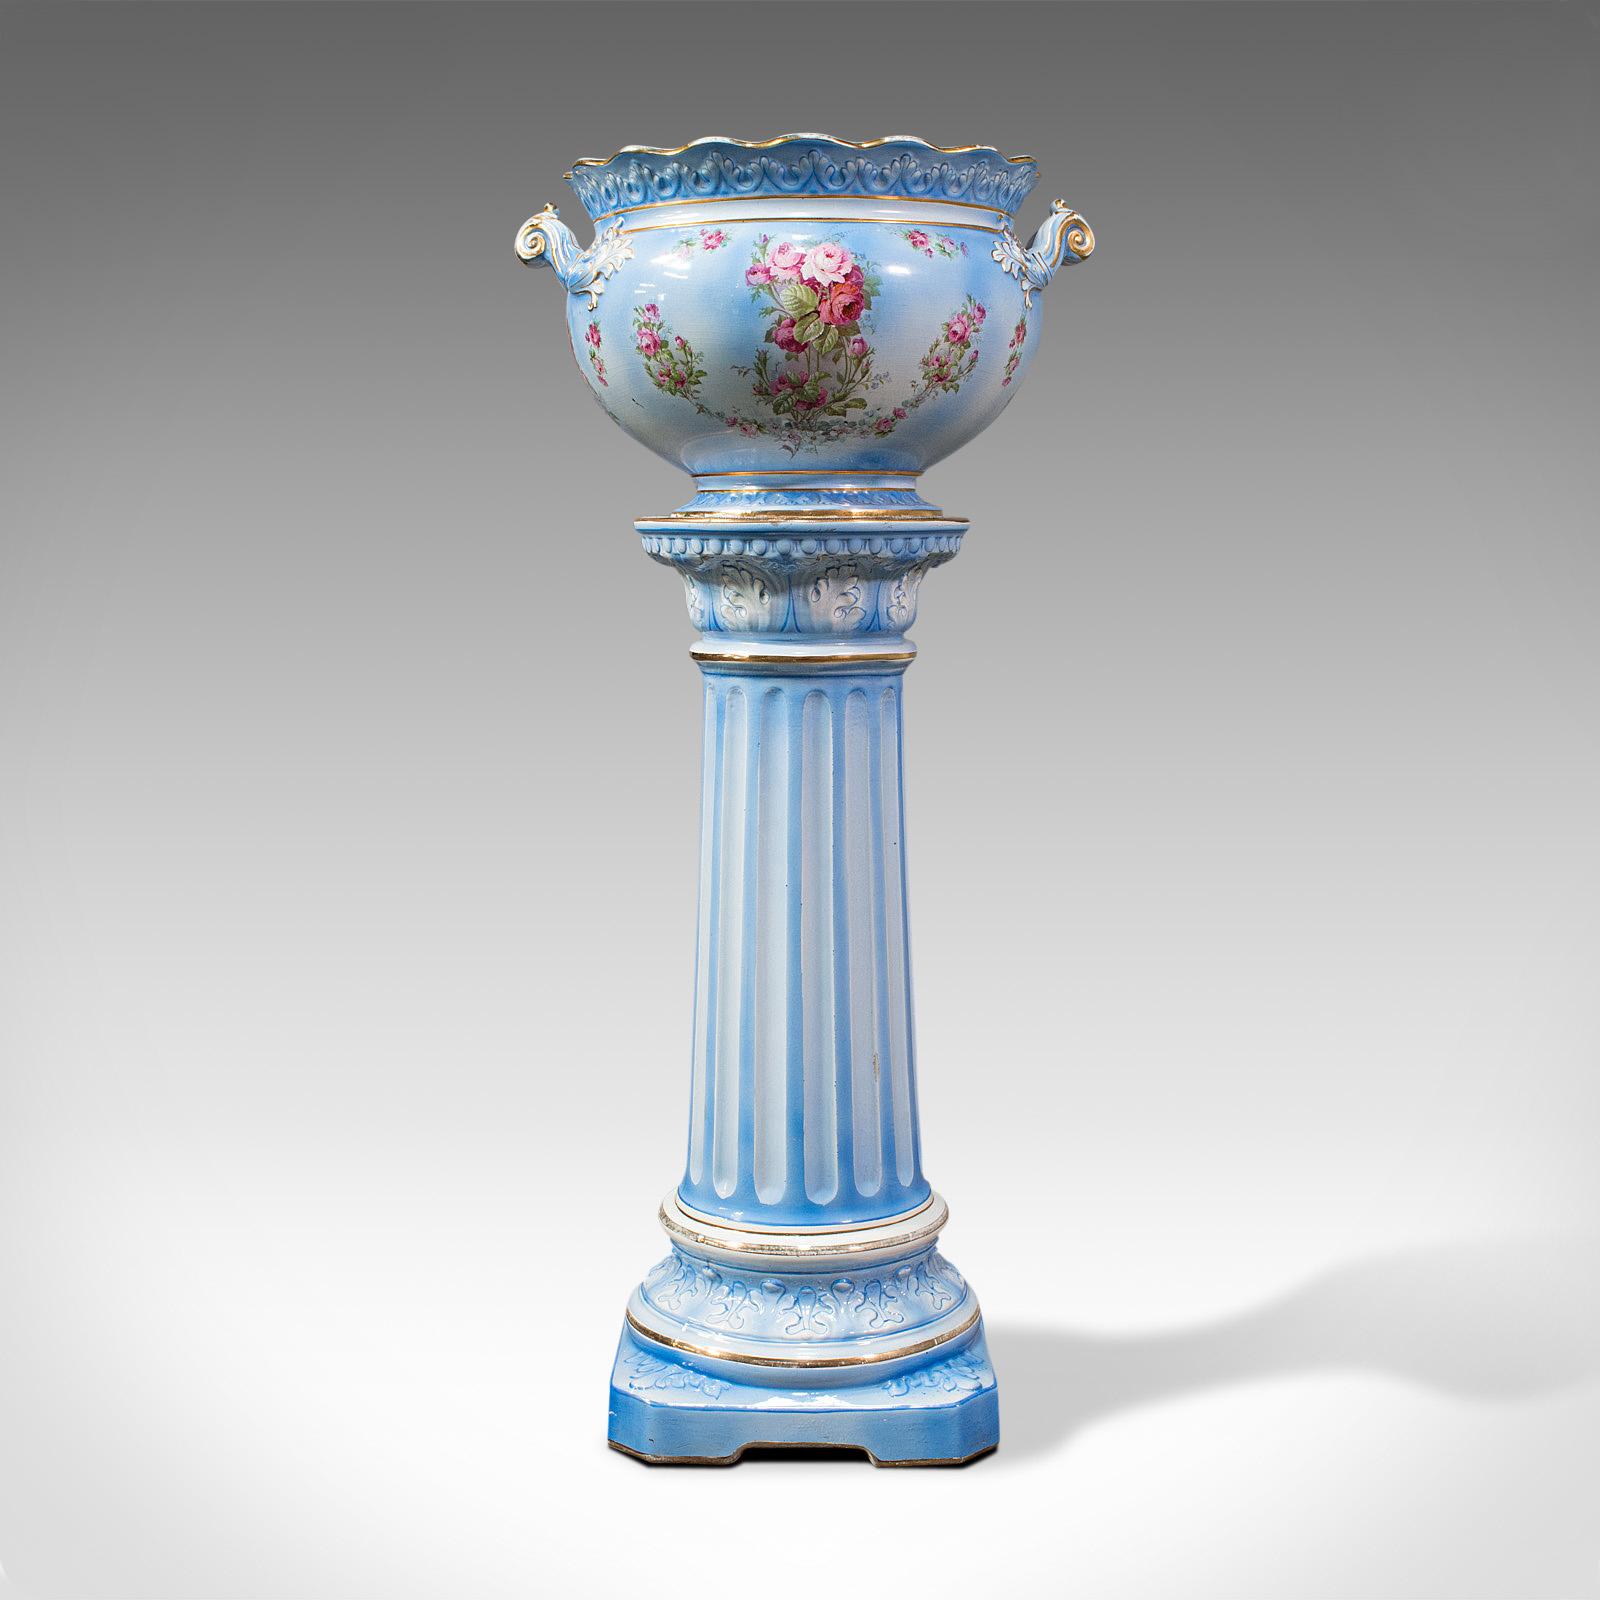 This is an antique jardinière on stand. An English, ceramic decorative planter with ornamental column, dating to the Victorian period, circa 1880.

Rich in colour and with classical and Renaissance overtones
Displaying a desirable aged patina -